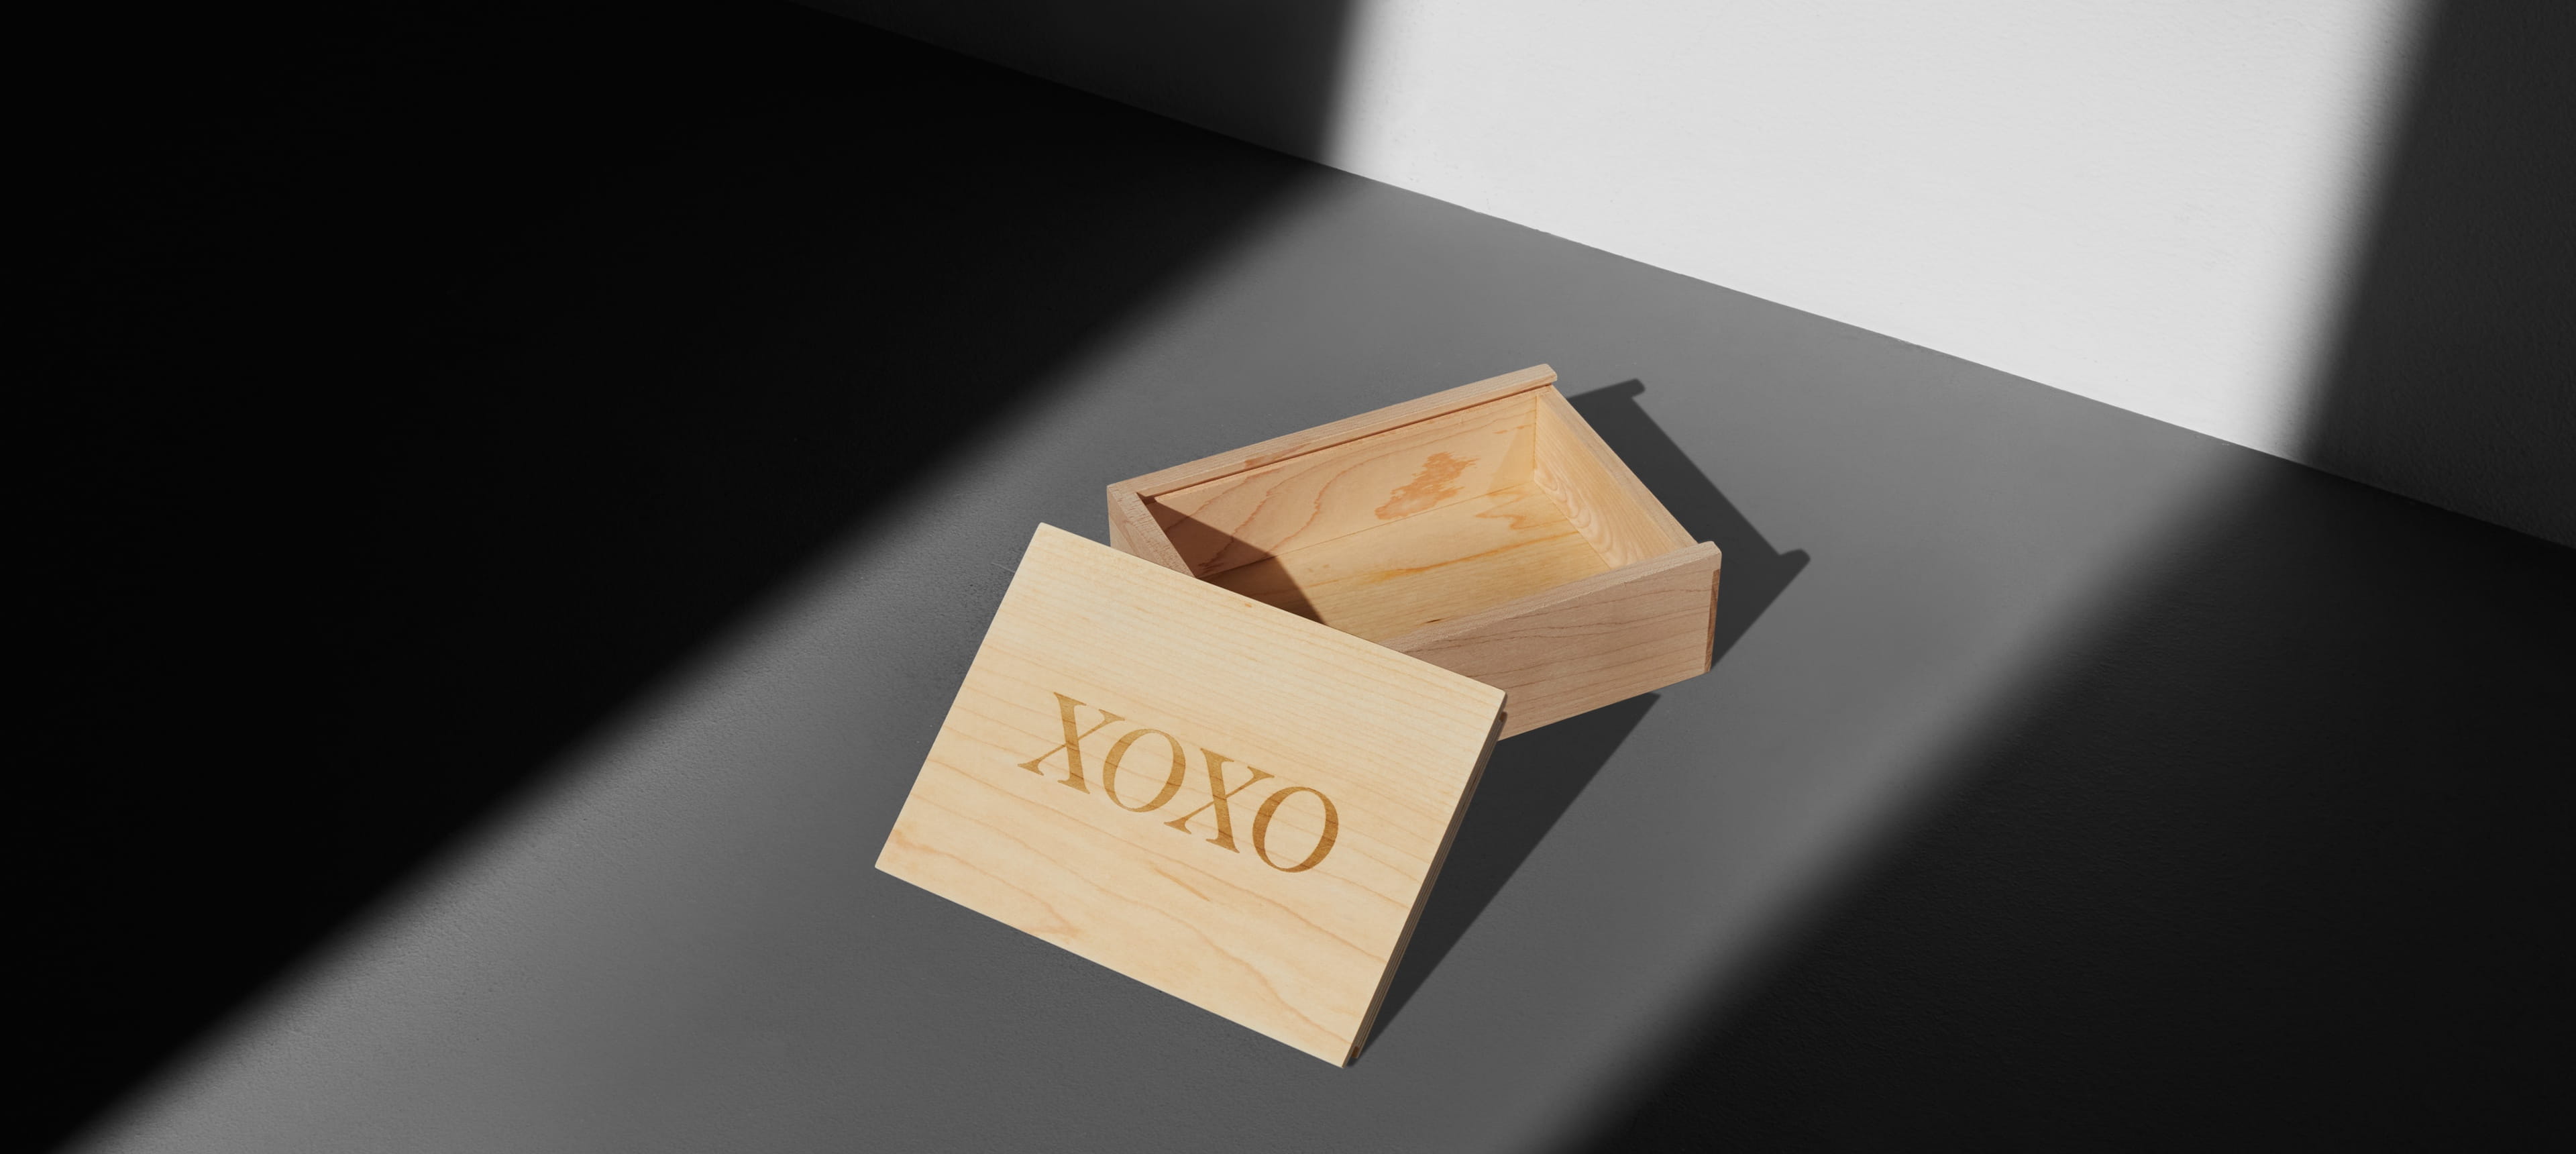 an wood box opened showing XOXO on the lid